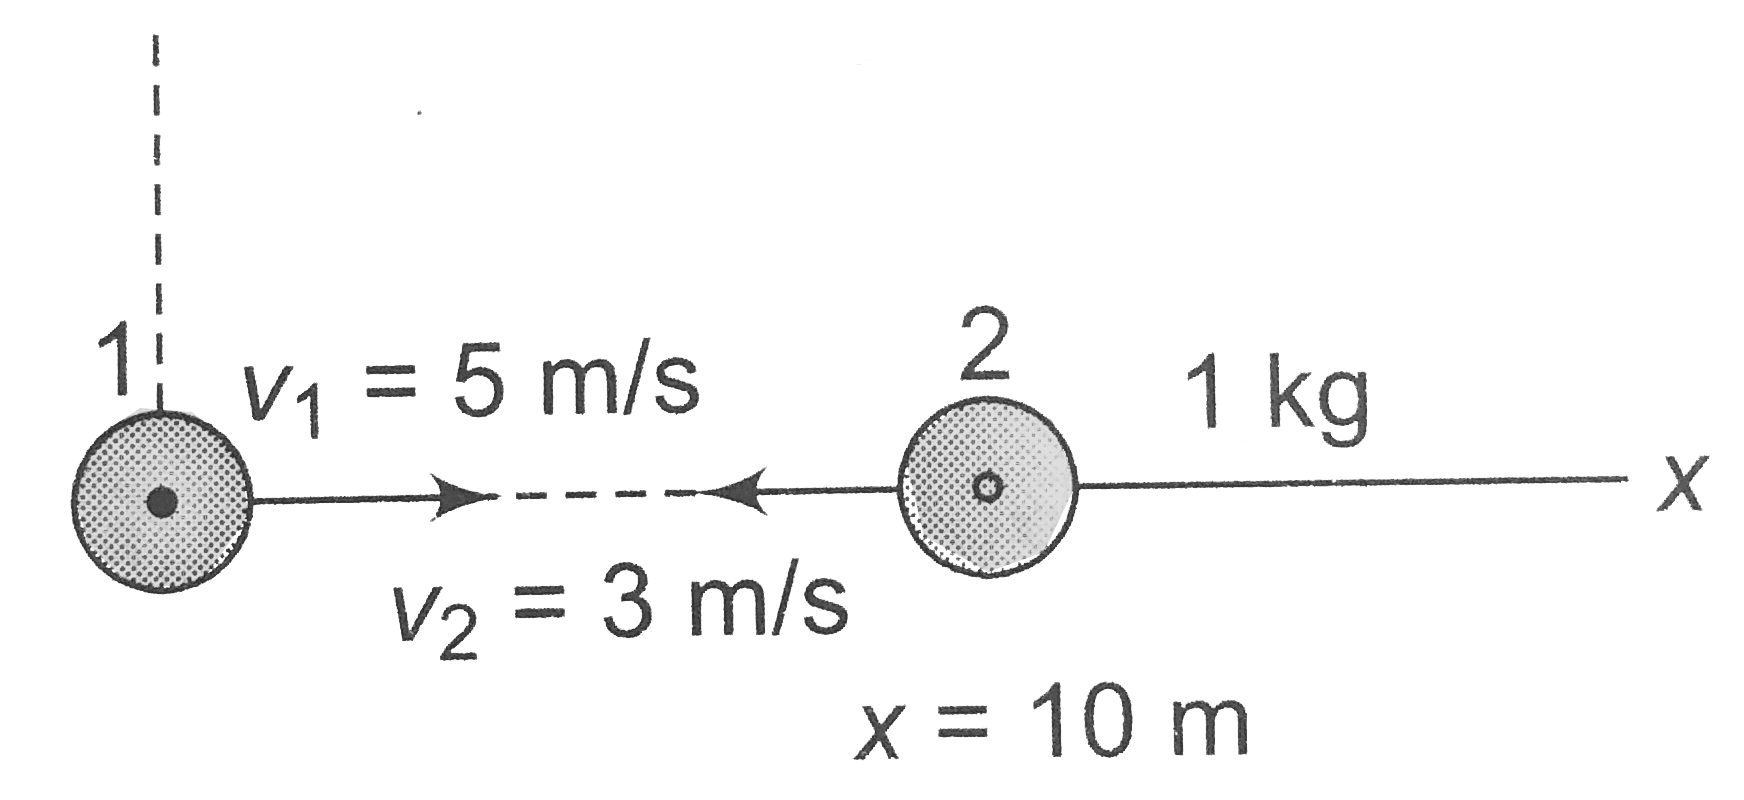 At t = 0, the positions and velocities of two particles are as shown in the figure. They are kept on a smooth surface and being mutually attracted by gravitational force. Find the position of centre of mass at t = 2s.   .